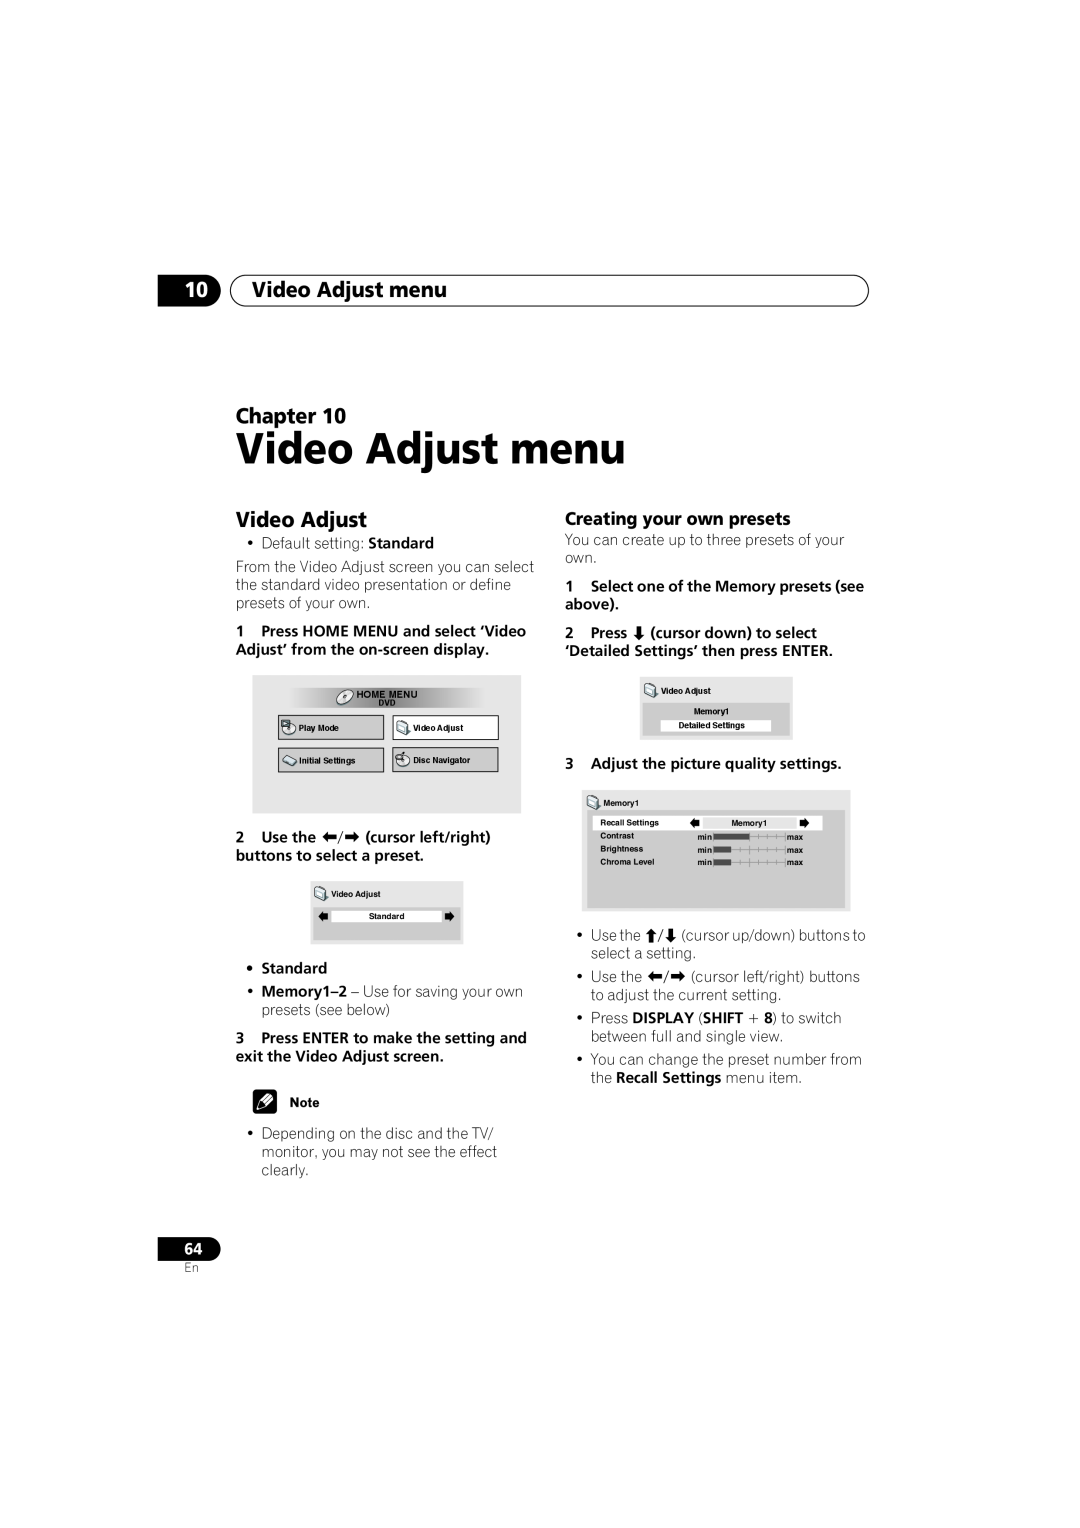 Pioneer S-HTD330 manual 10Video Adjust menu Chapter, Creating your own presets 